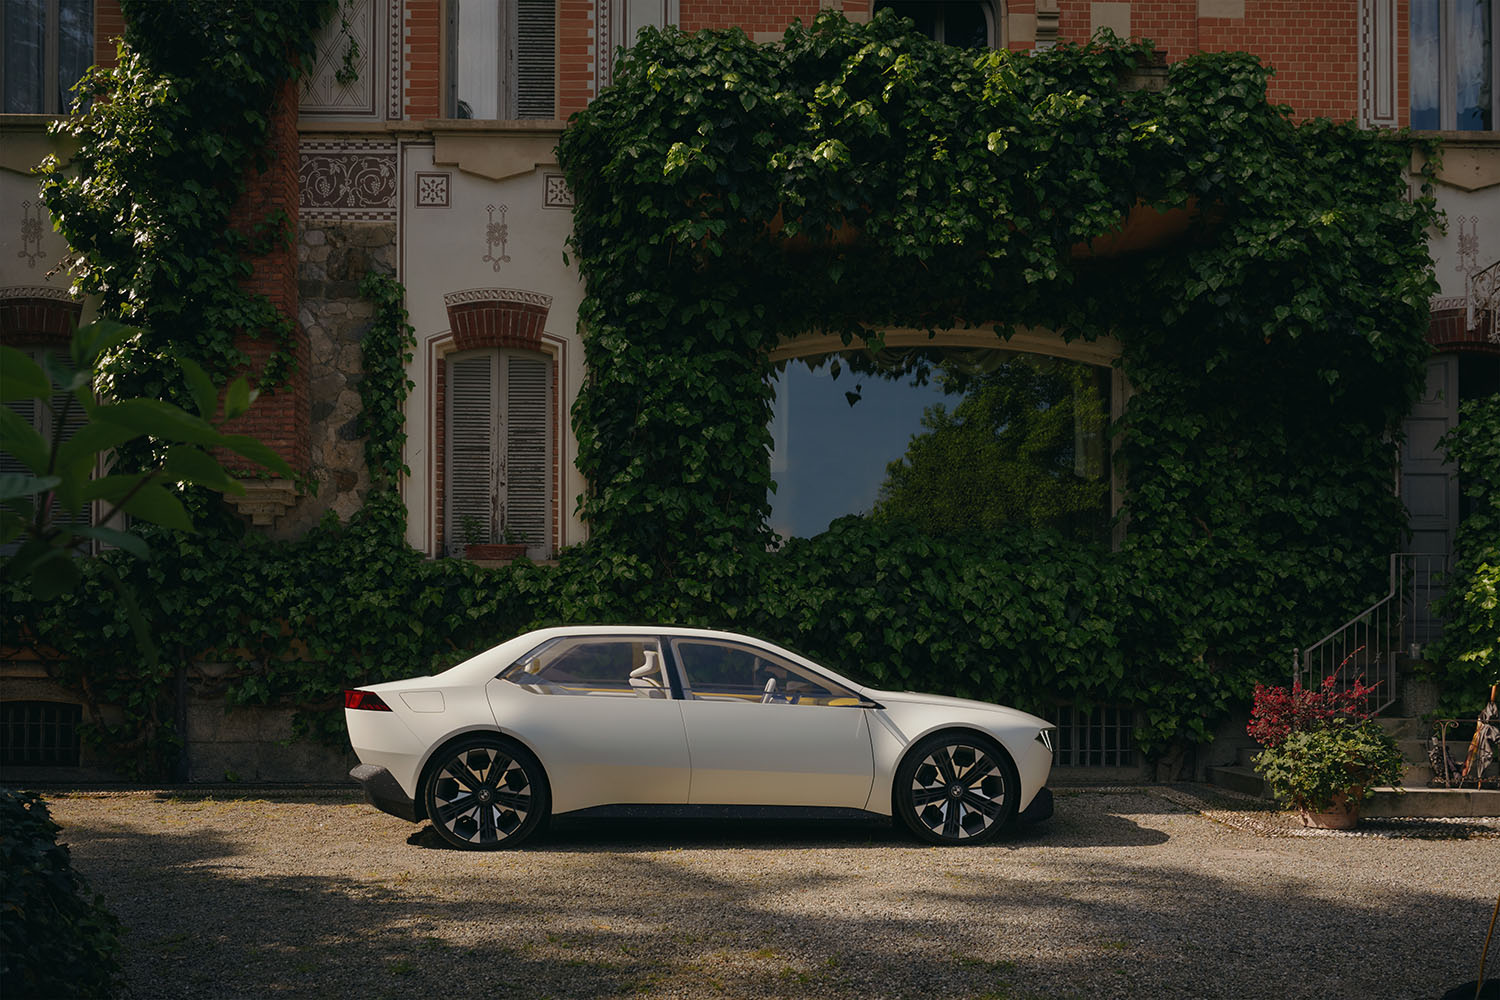 BMW Vision Neue Klasse in Joyous Bright off-white parked outside a lush villa, side view